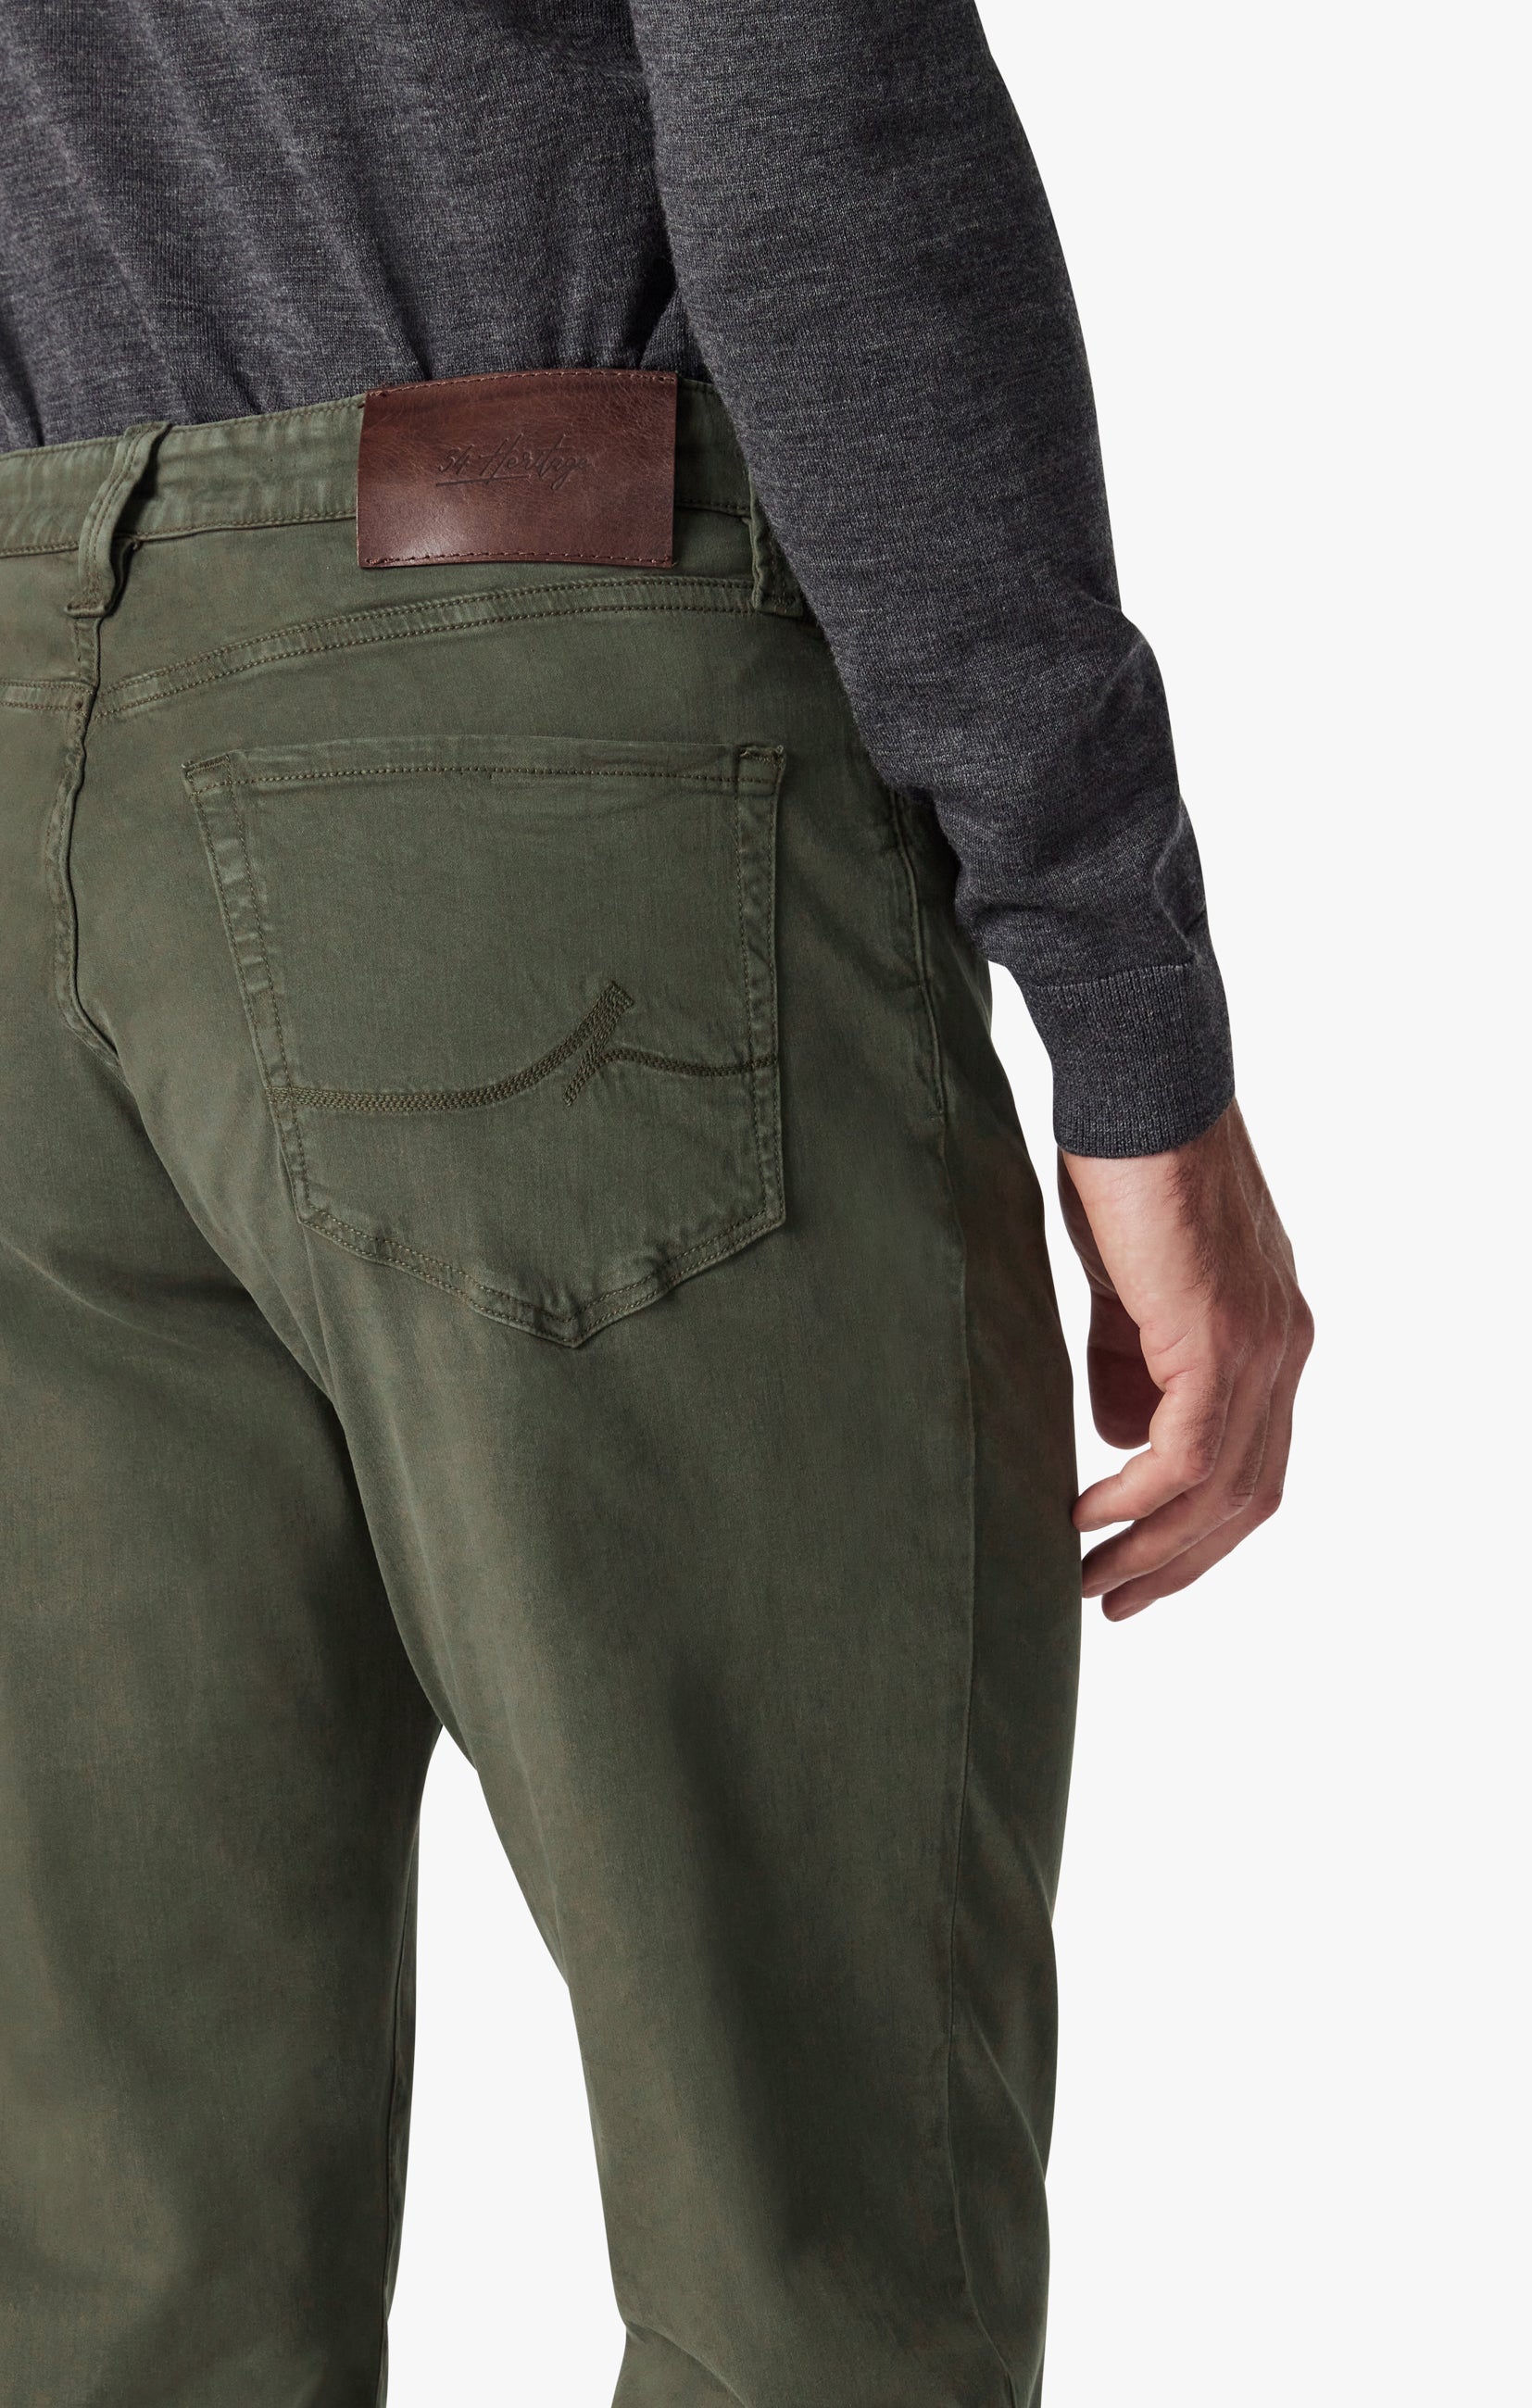 Charisma Classic Fit Pants in Green Twill Image 3